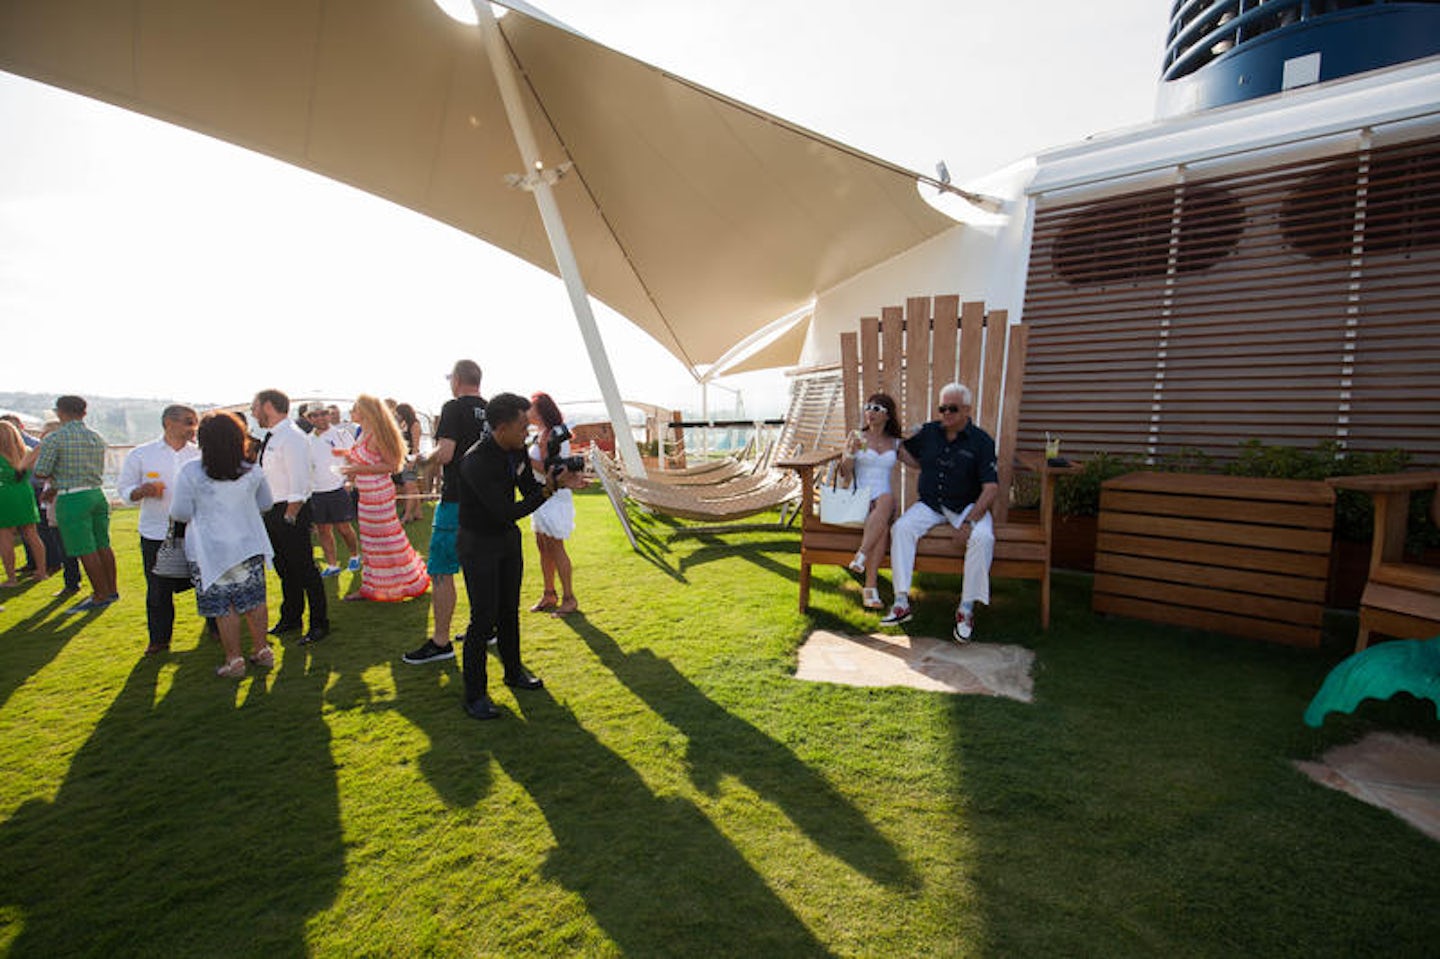 The Lawn Club on Celebrity Reflection